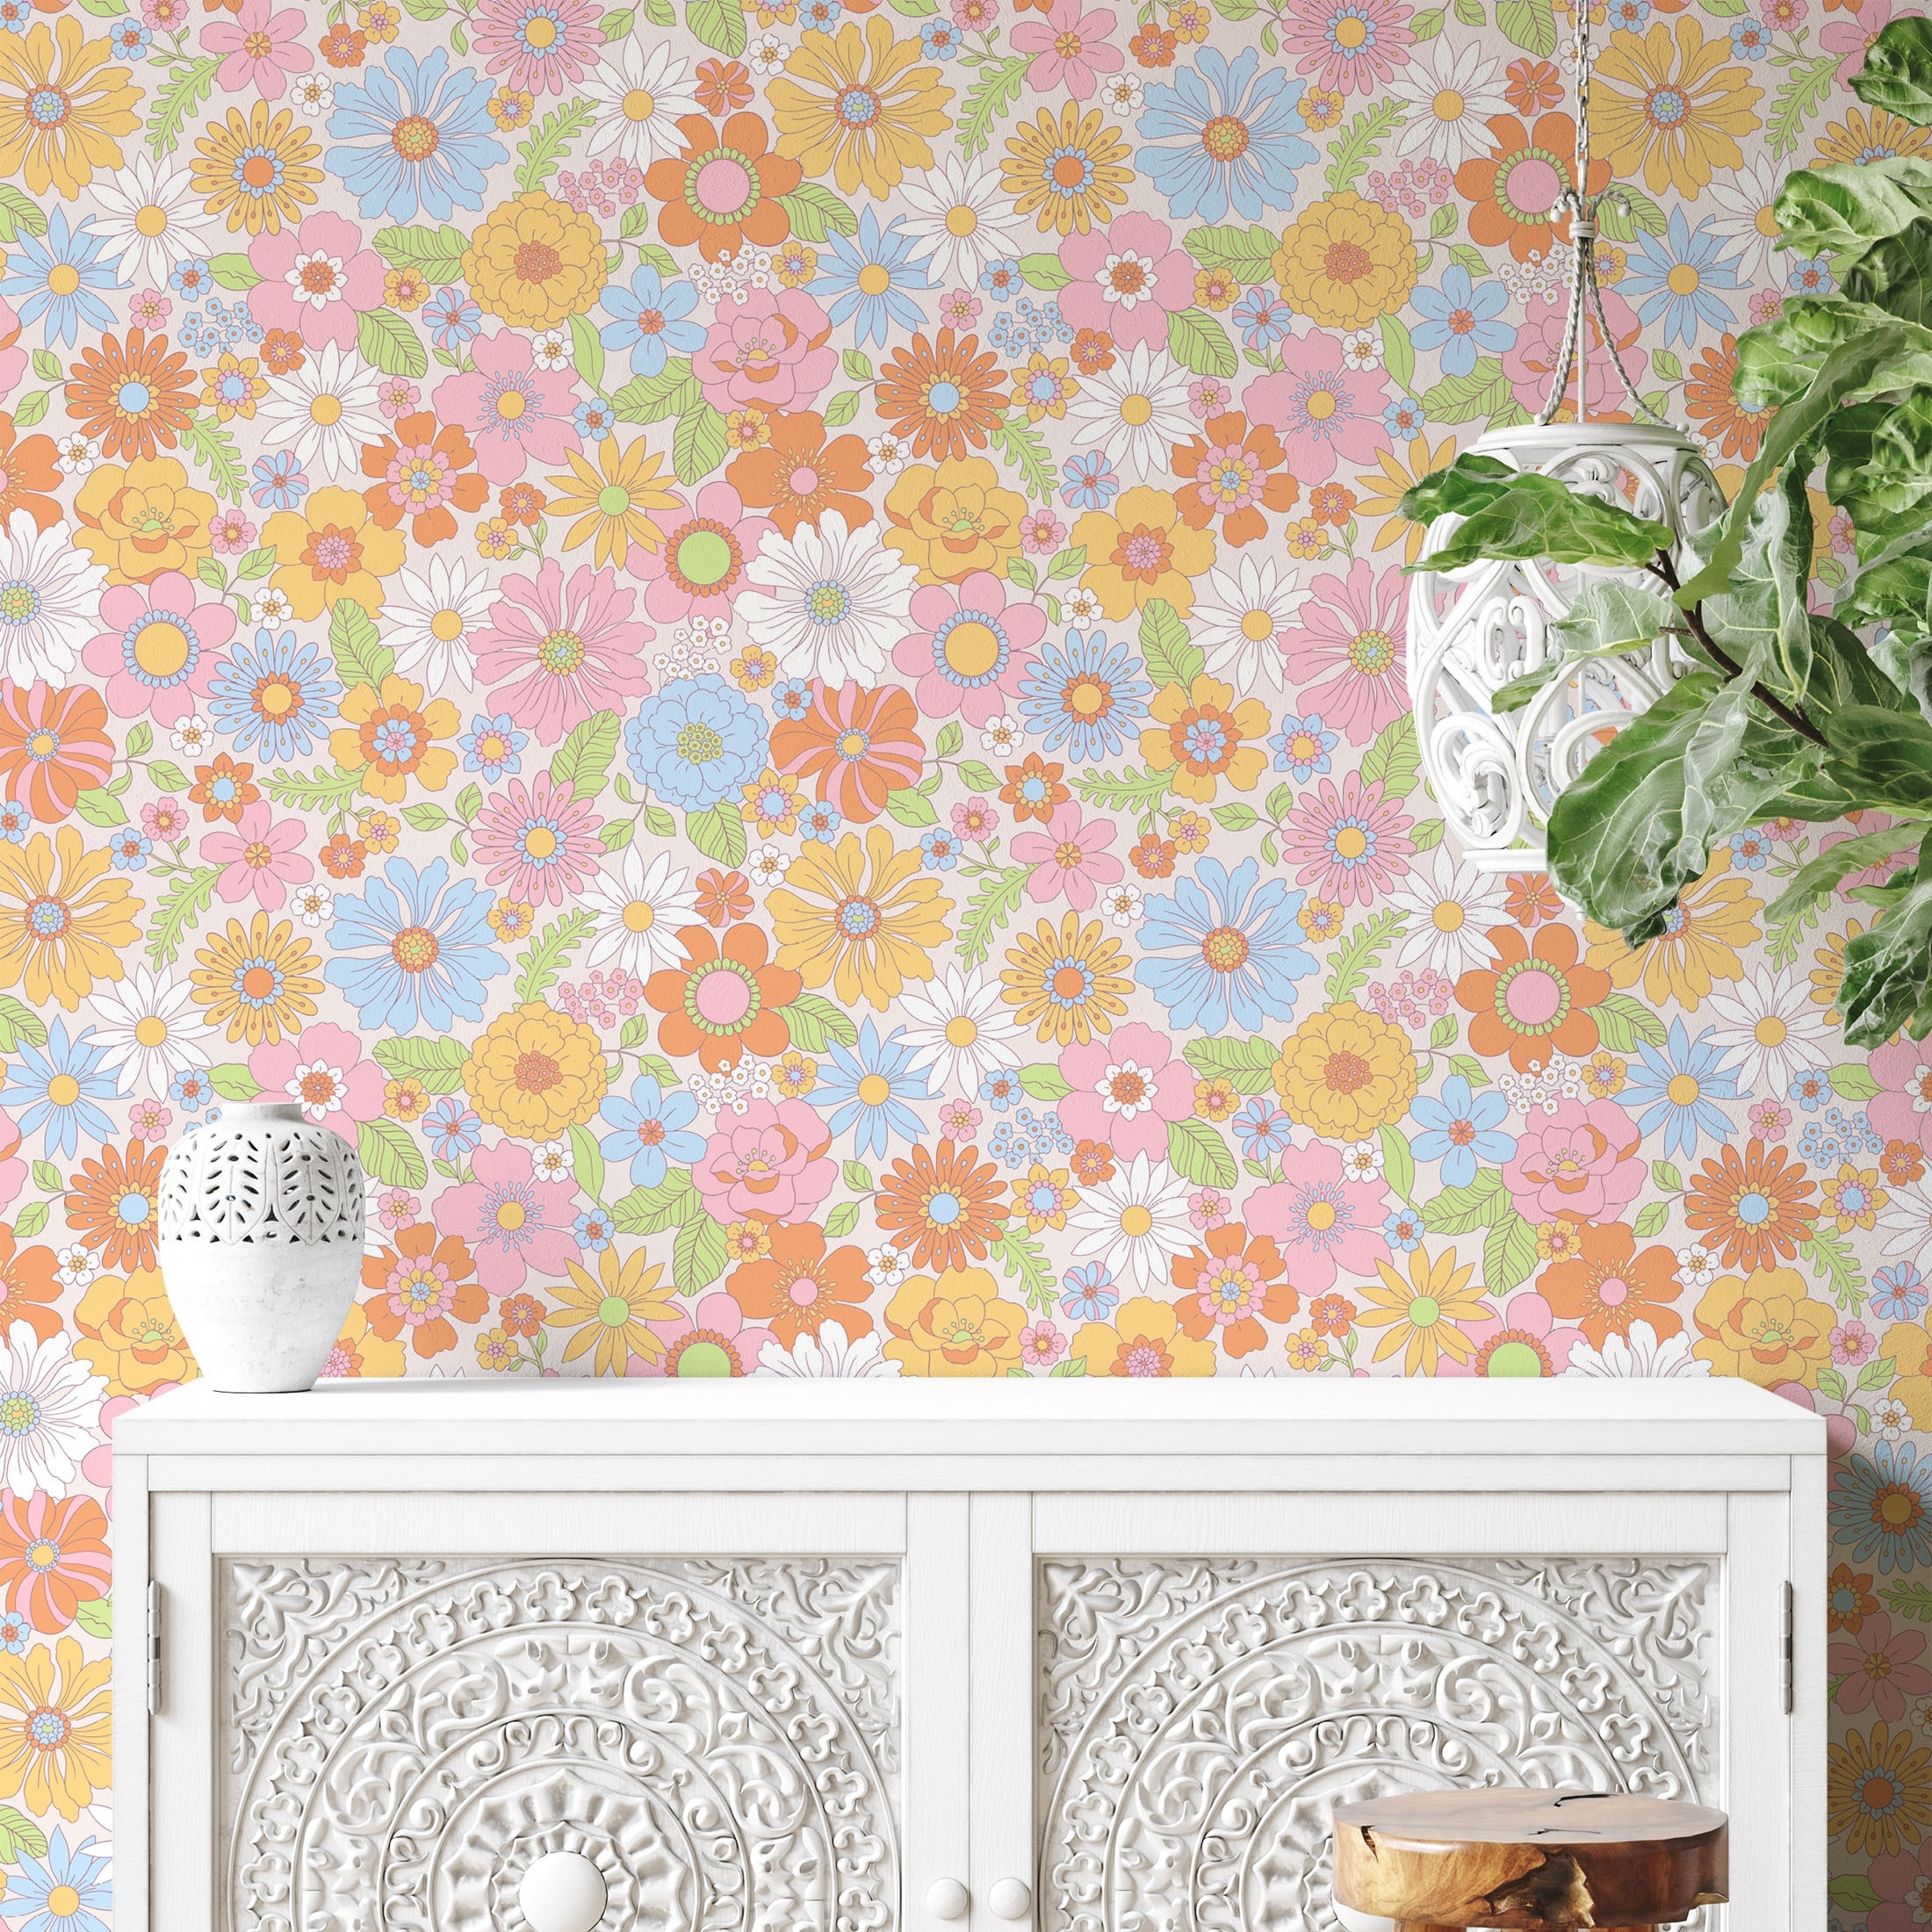 

1pc, Fresh Floral Wallpaper, Peel-and-stick, Vinyl, Waterproof Removable Wall Stickers, Home Room Decor, Wall Art, Wall Decor - Bright Flower Patterns